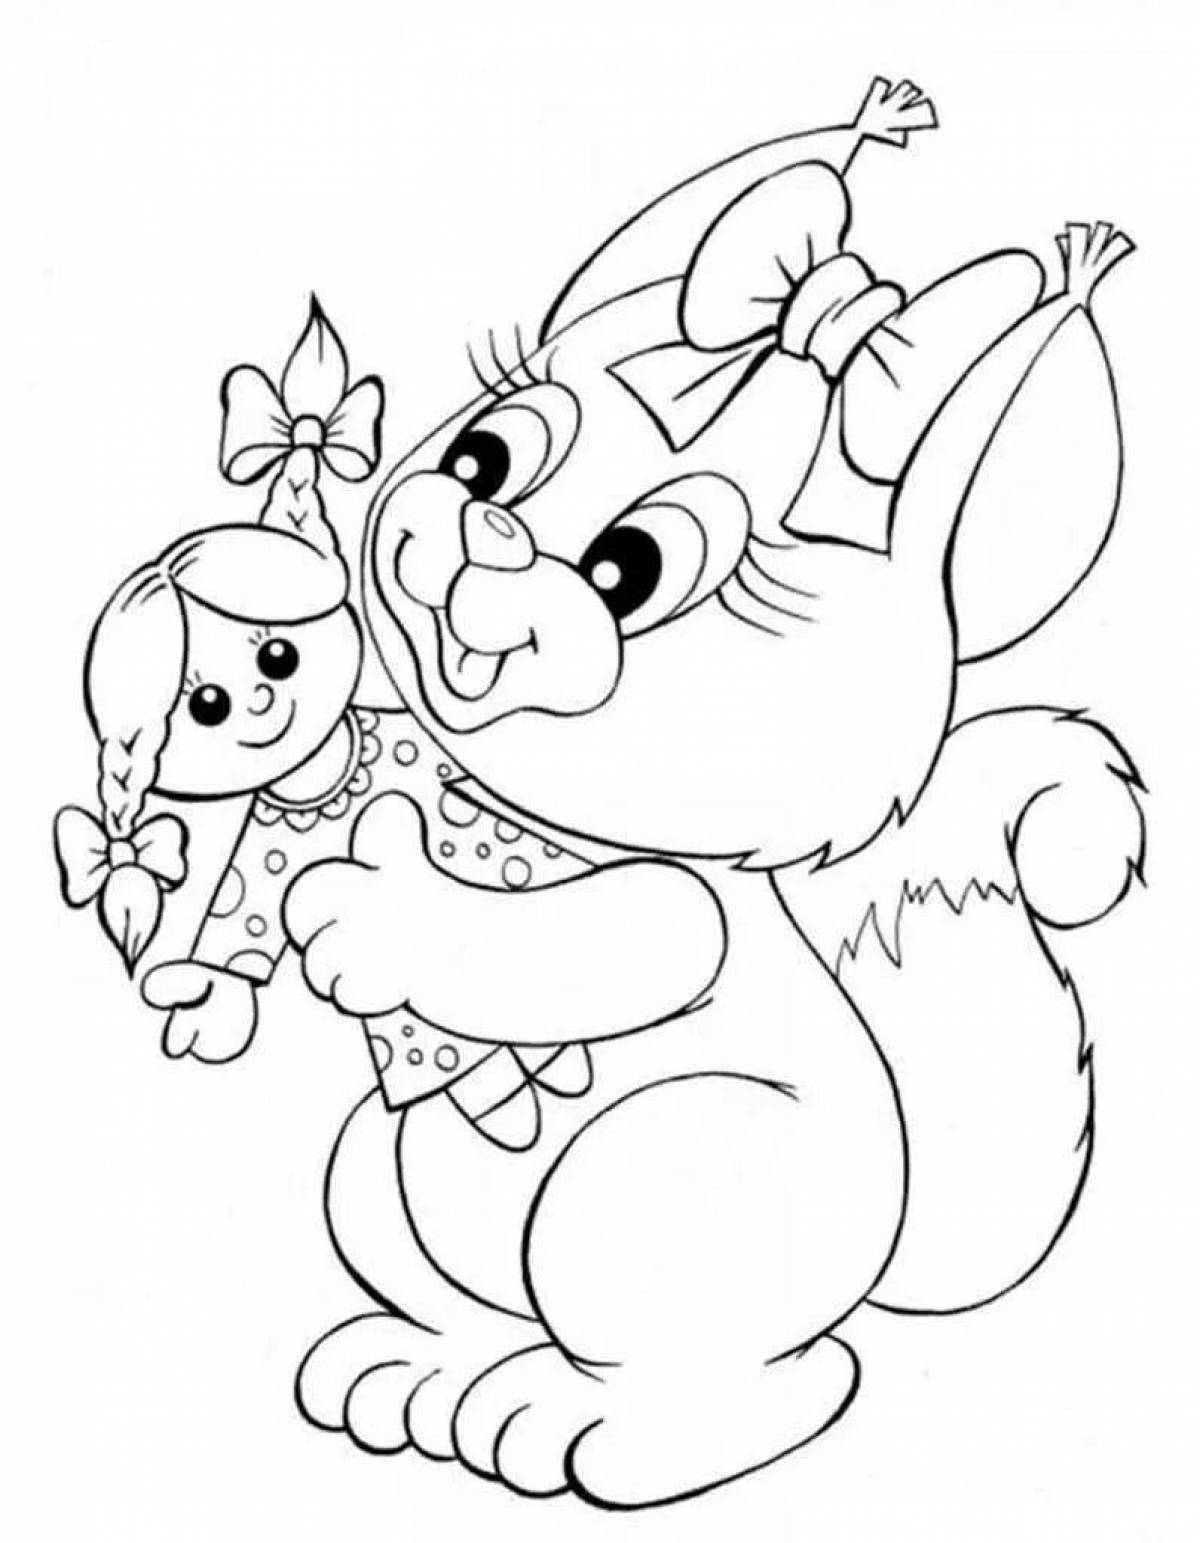 Naughty little animal coloring pages